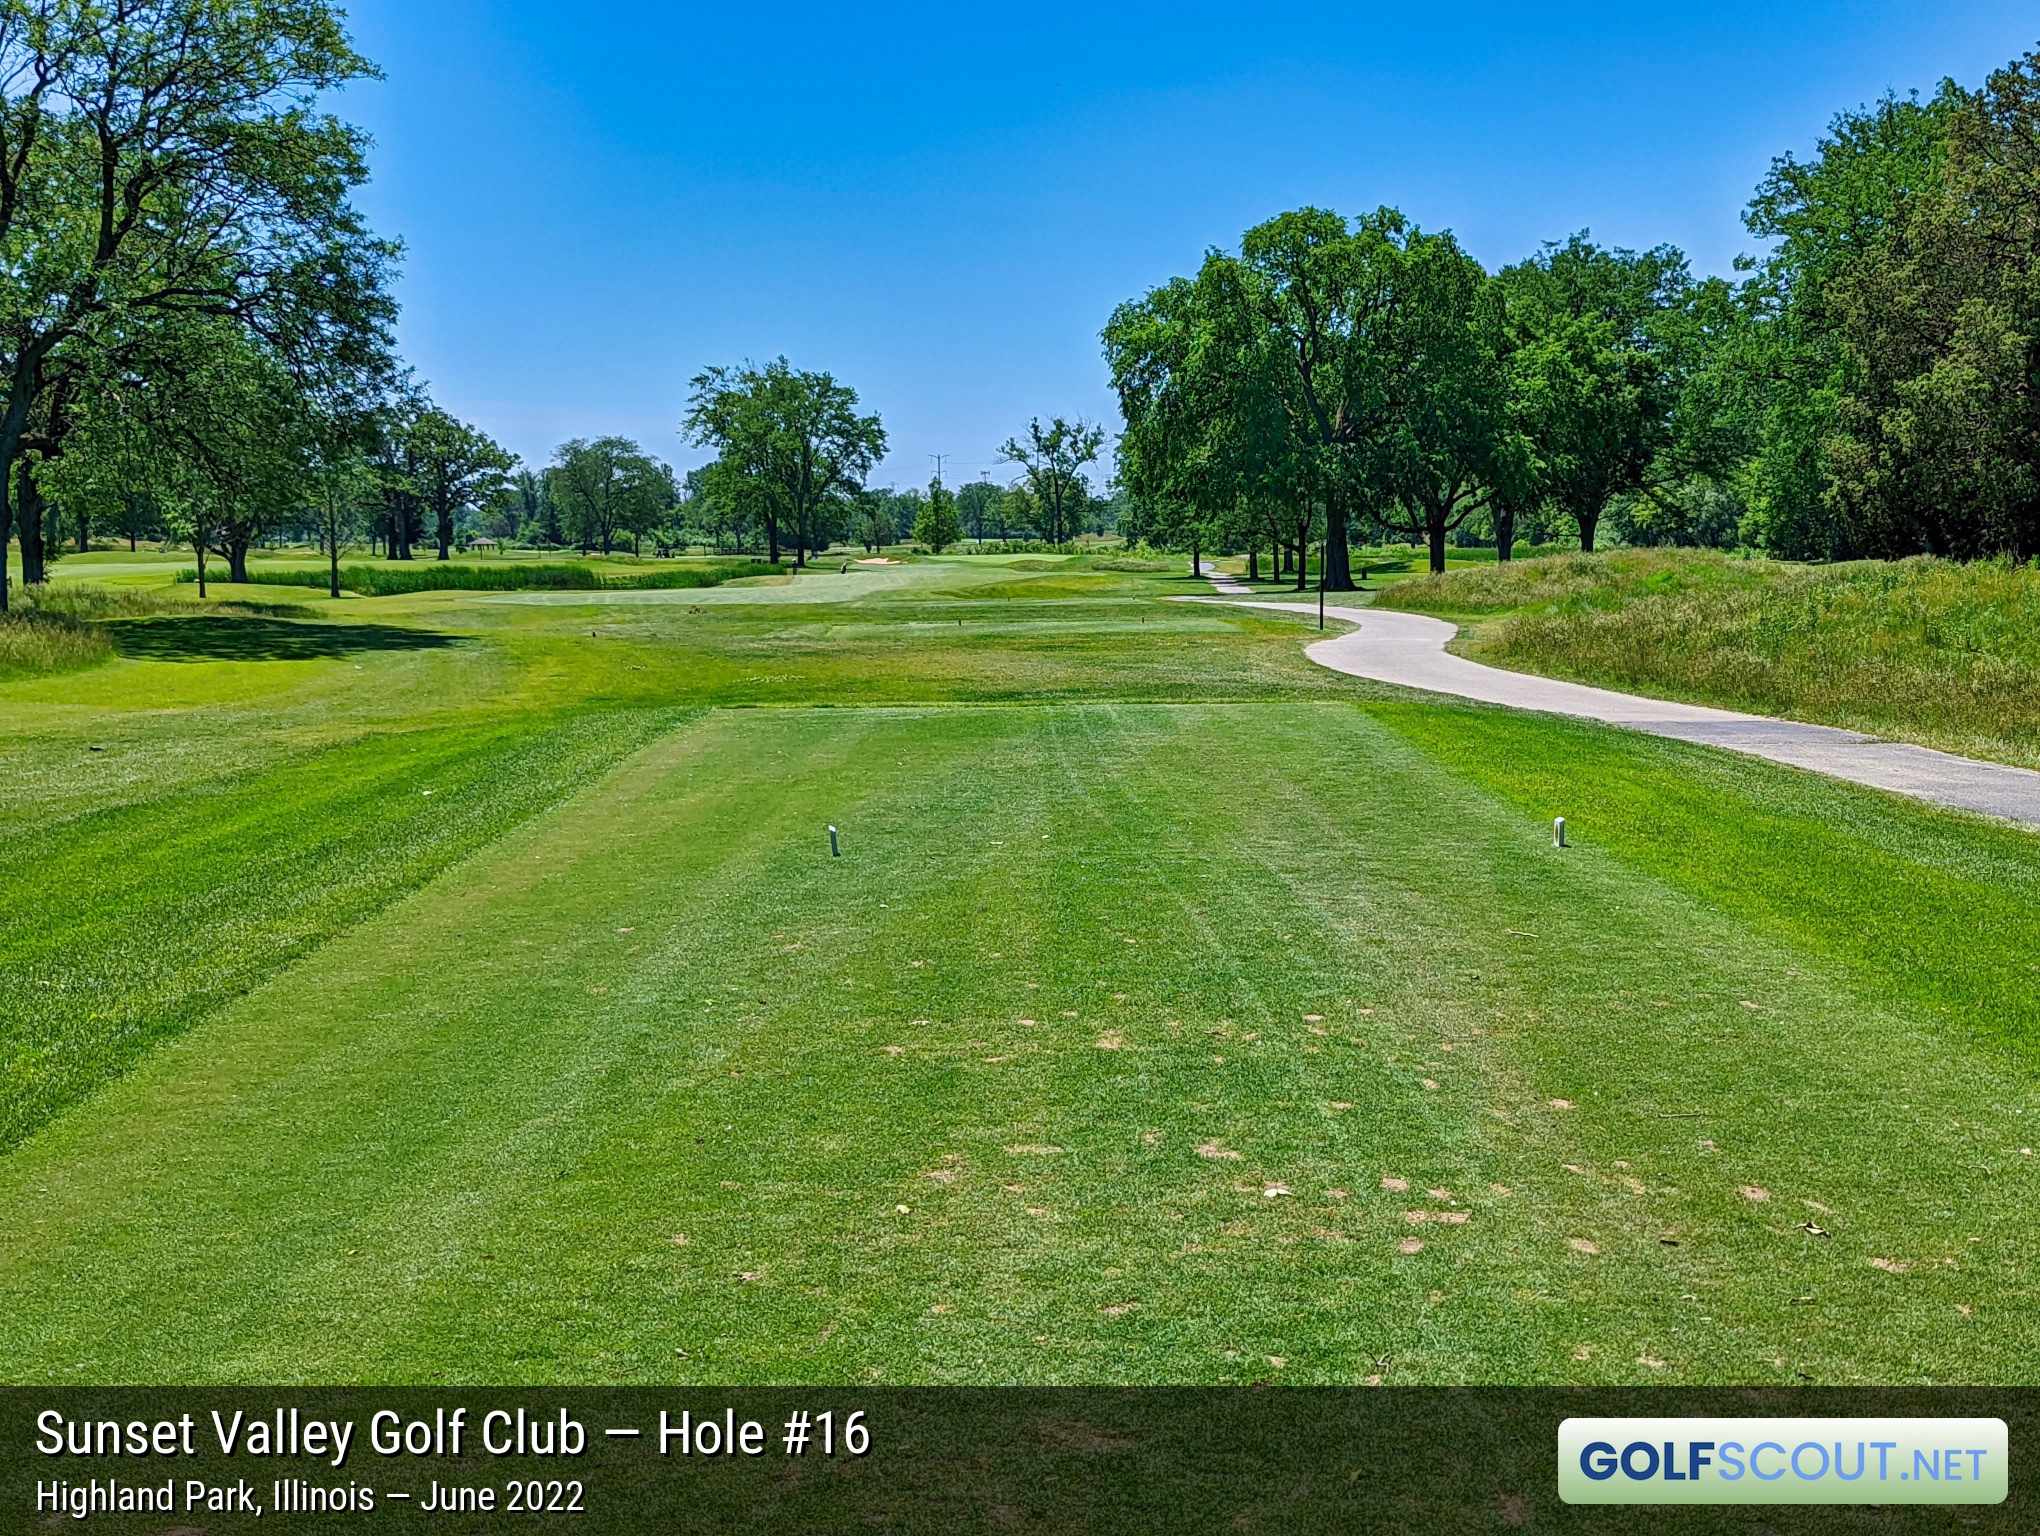 Photo of hole #16 at Sunset Valley Golf Club in Highland Park, Illinois. 